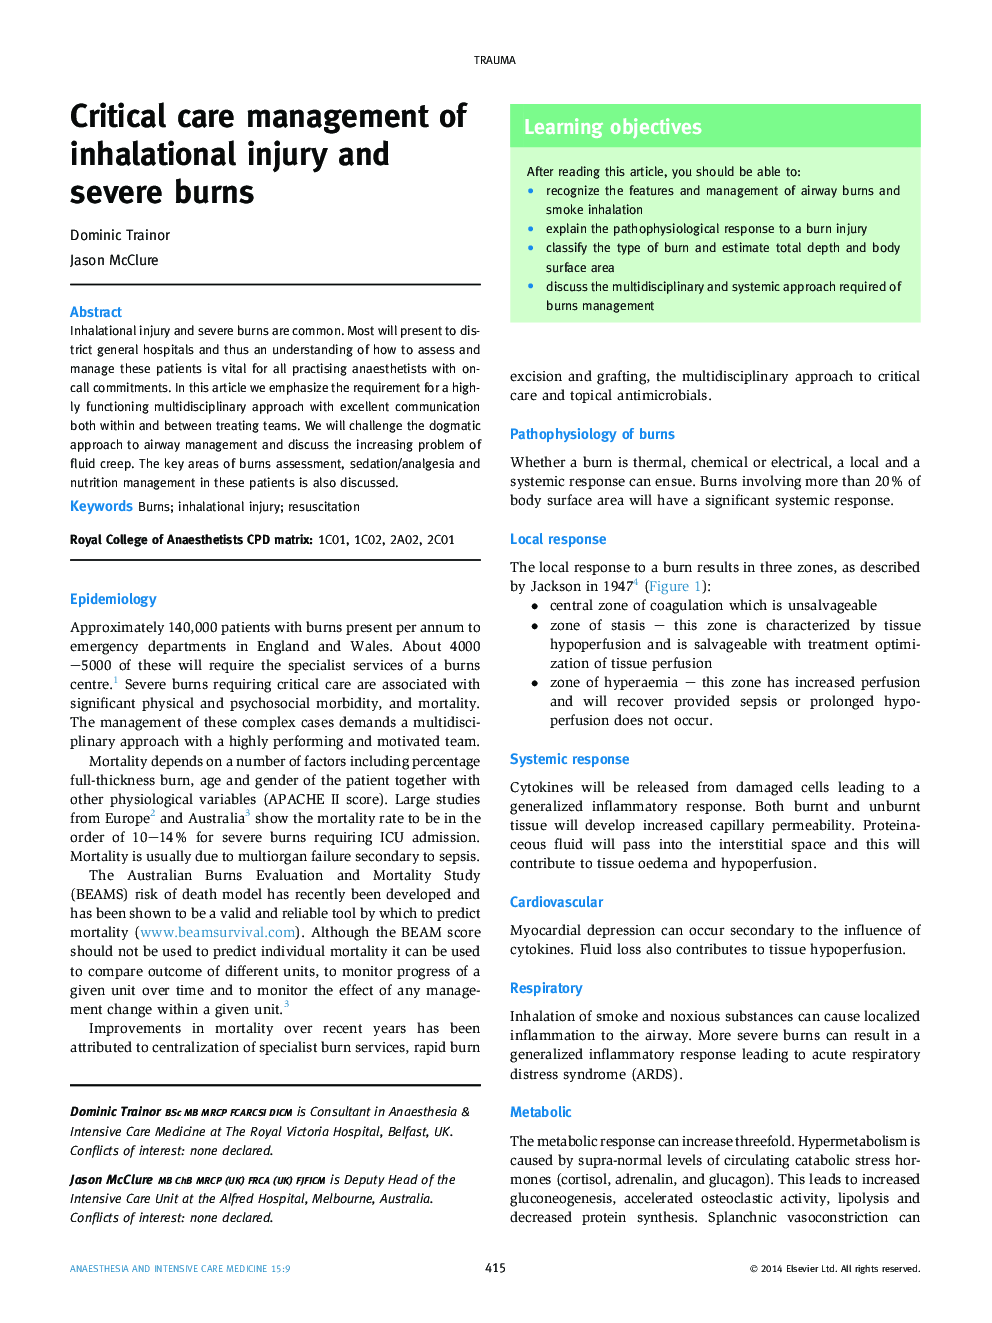 Critical care management of inhalational injury and severe burns